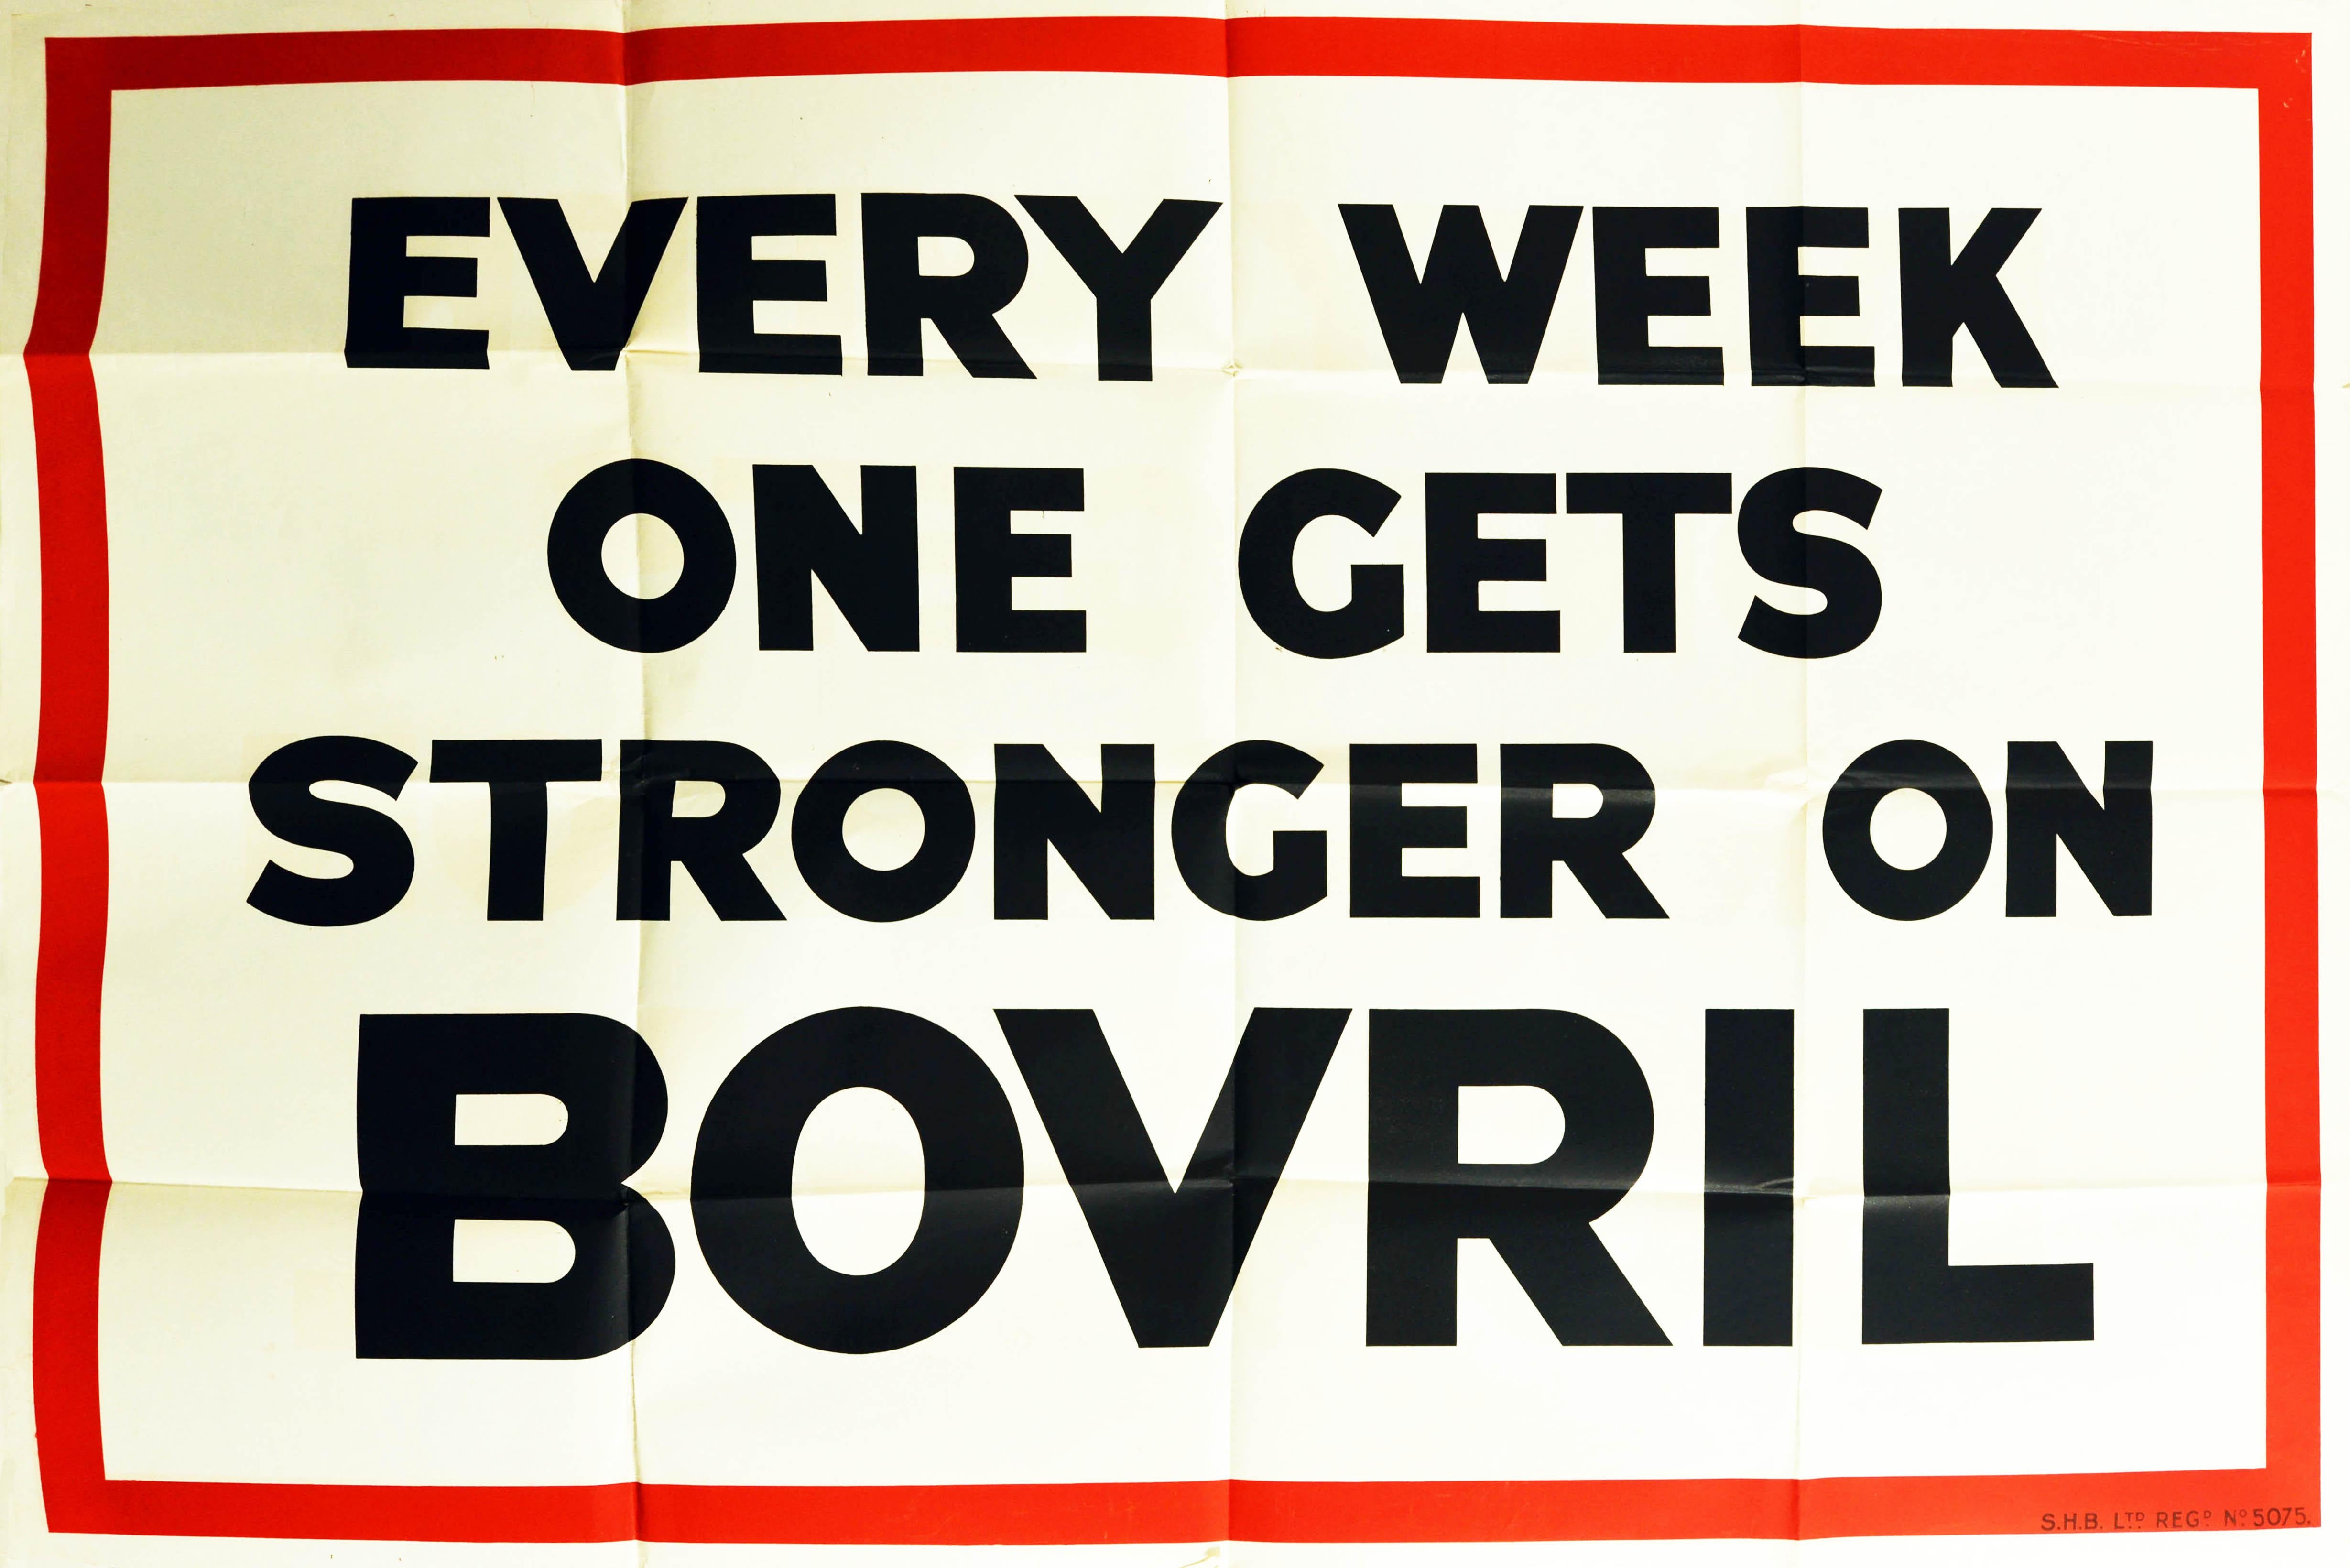 Original vintage food advertising poster for Bovril - Every week one gets stronger on Bovril - featuring bold black lettering on a white background in a red frame border. Printed in Britain in the 1930s, this campaign used puns and word play to